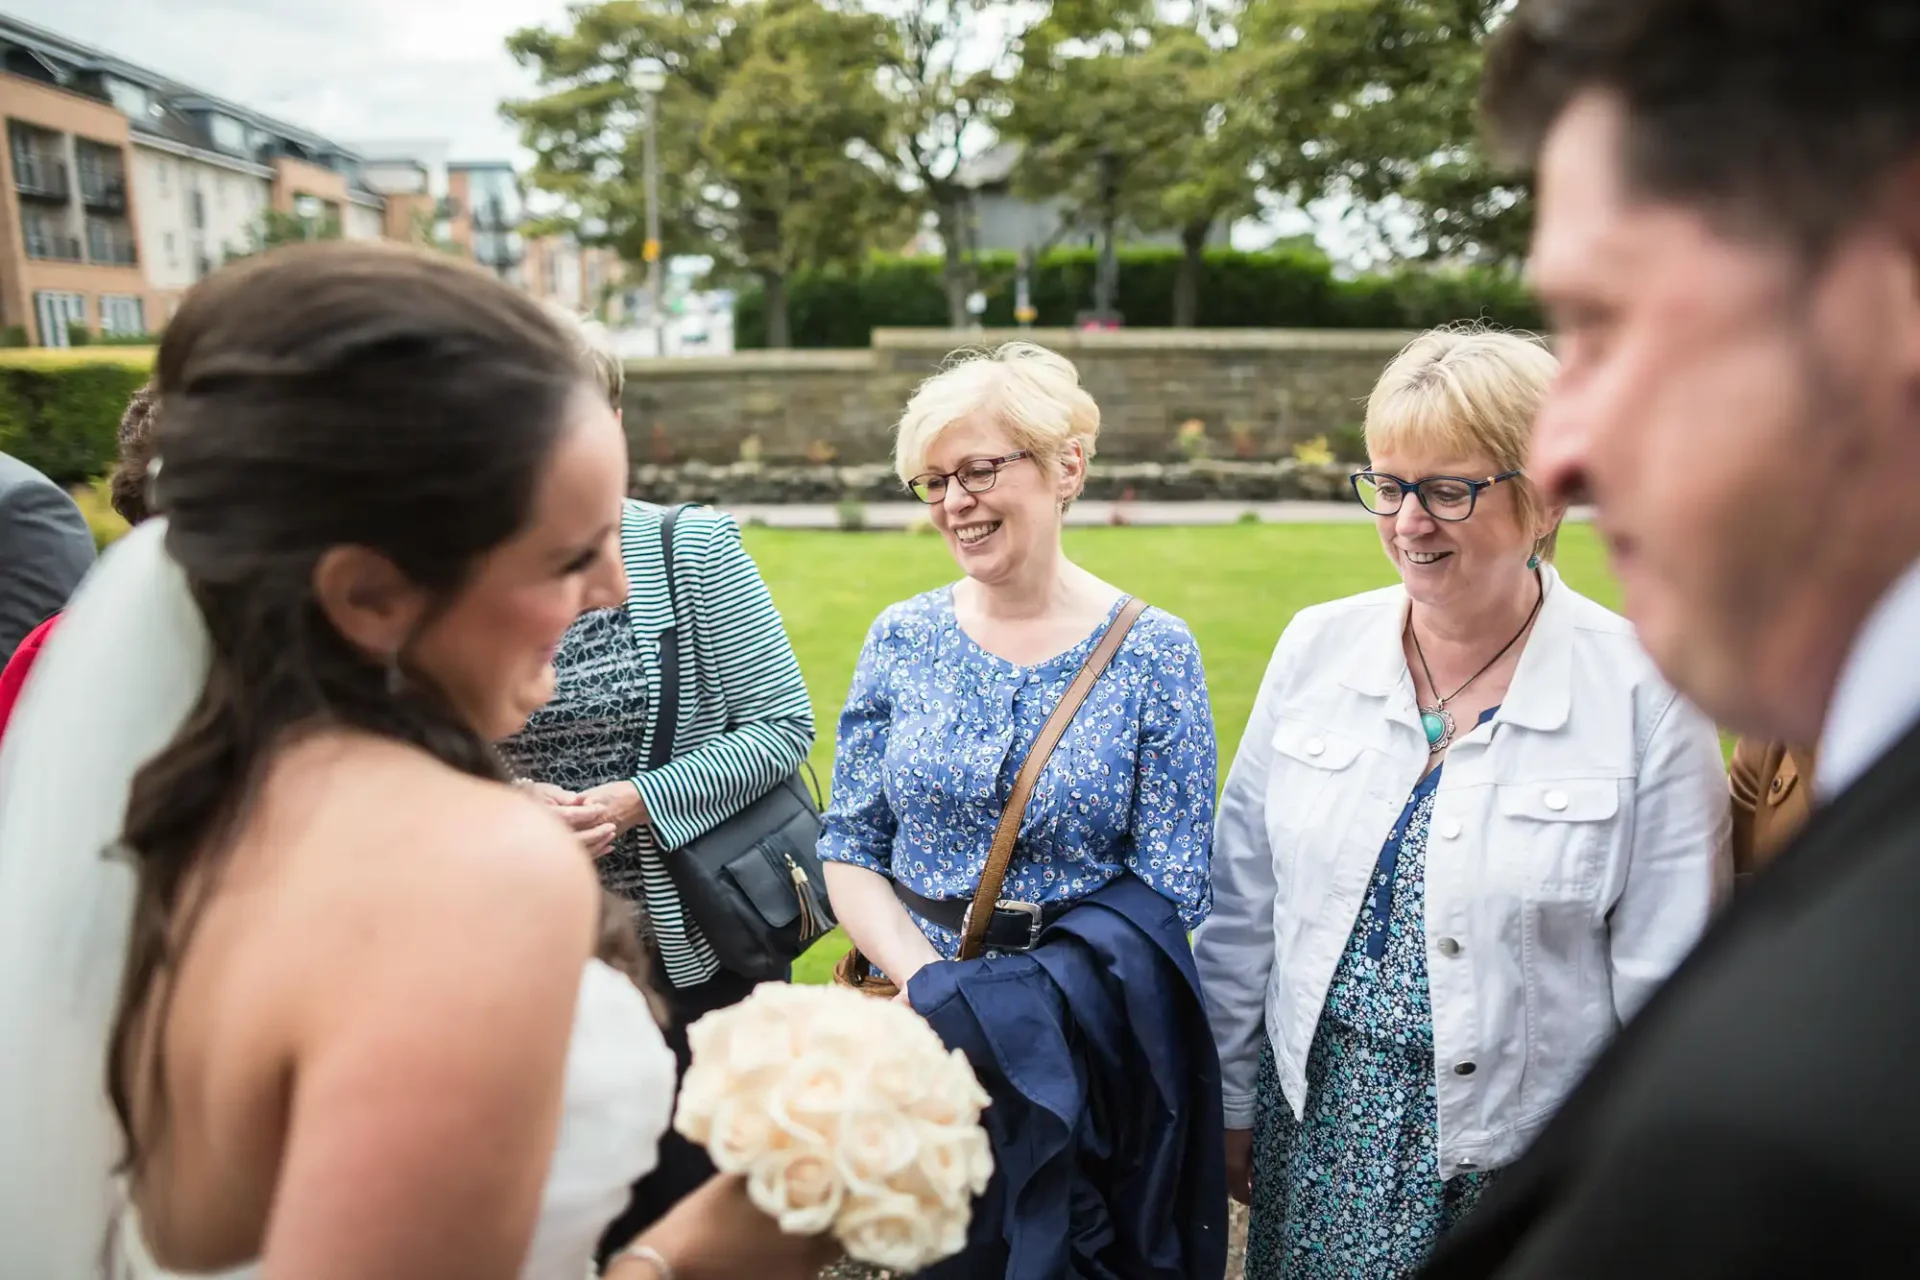 A bride holding a bouquet laughs joyfully with guests during a wedding reception outdoors.